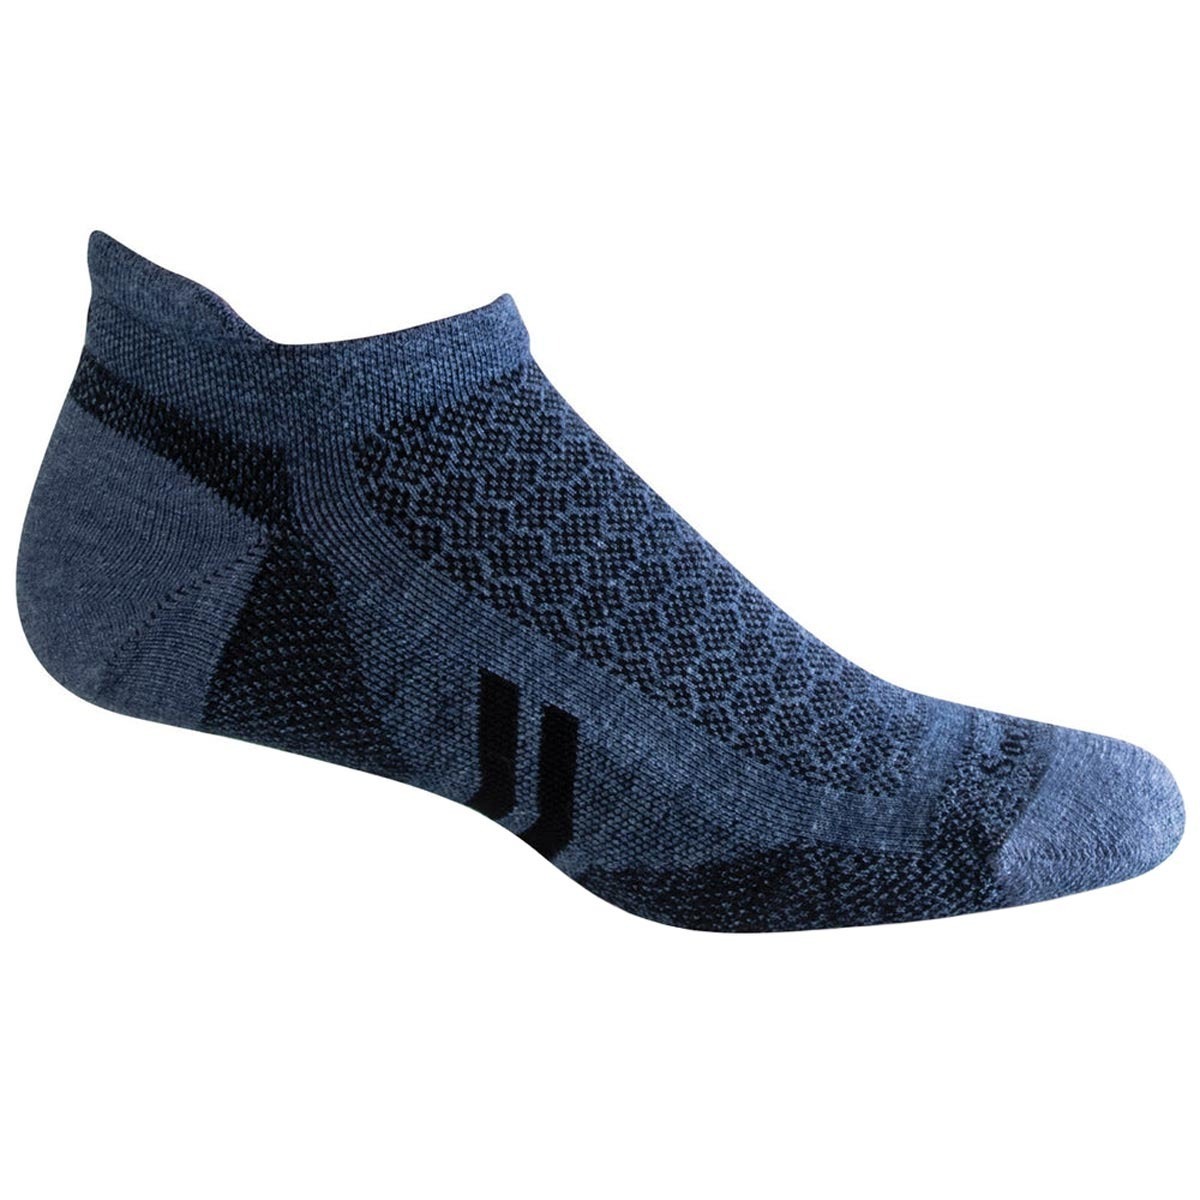 40% Off Sockwell Men’s and Women’s Comfort & Compression Socks from $10 ...